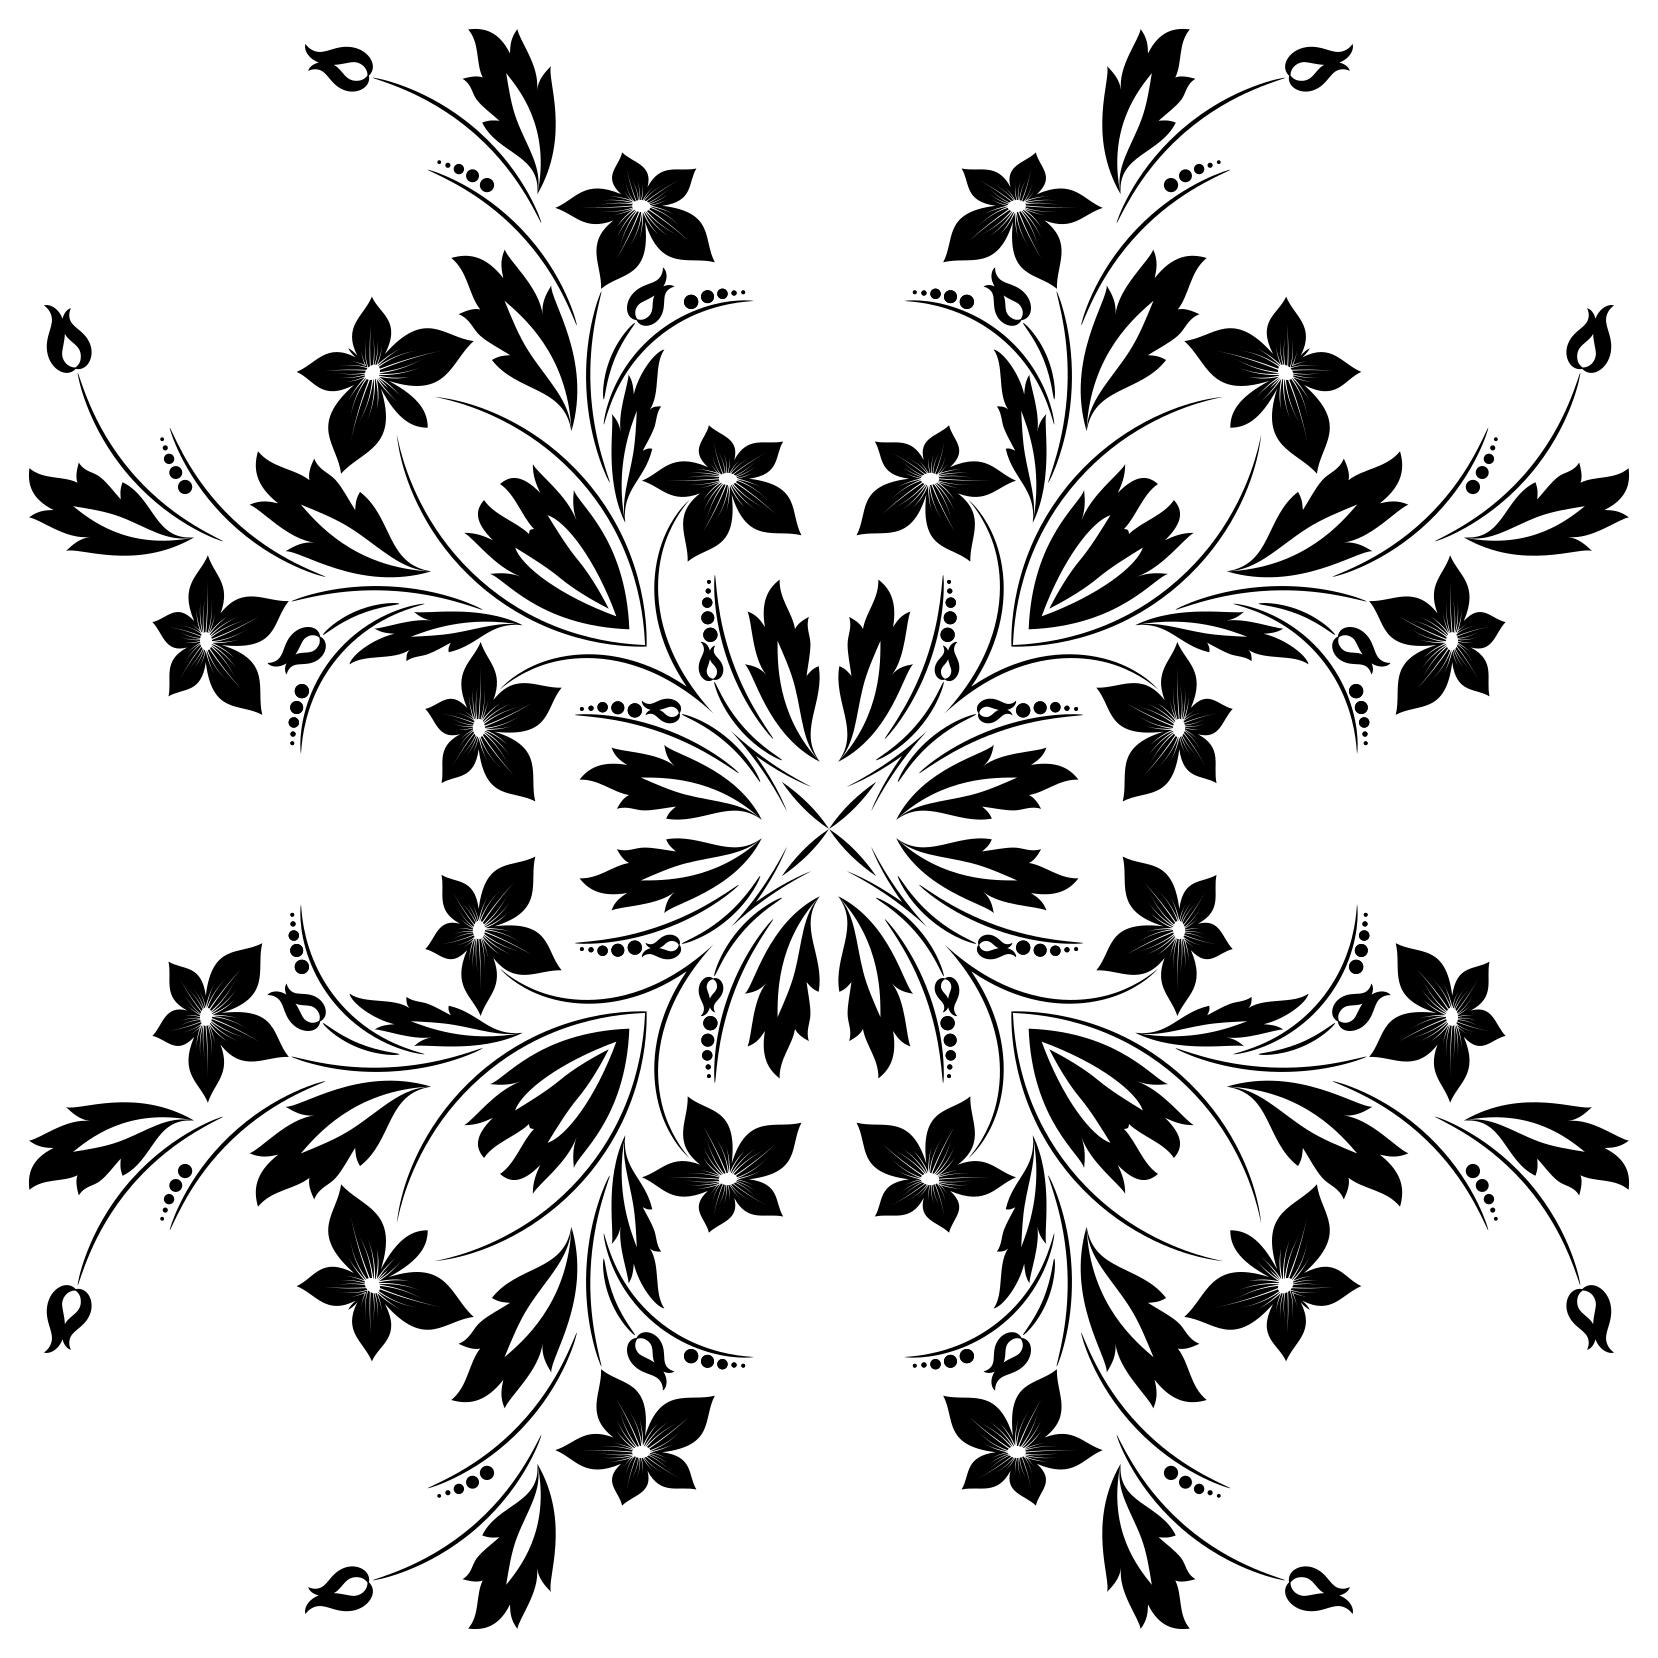 Flower Ornament Extrapolated 2 Clipart - Design Droide